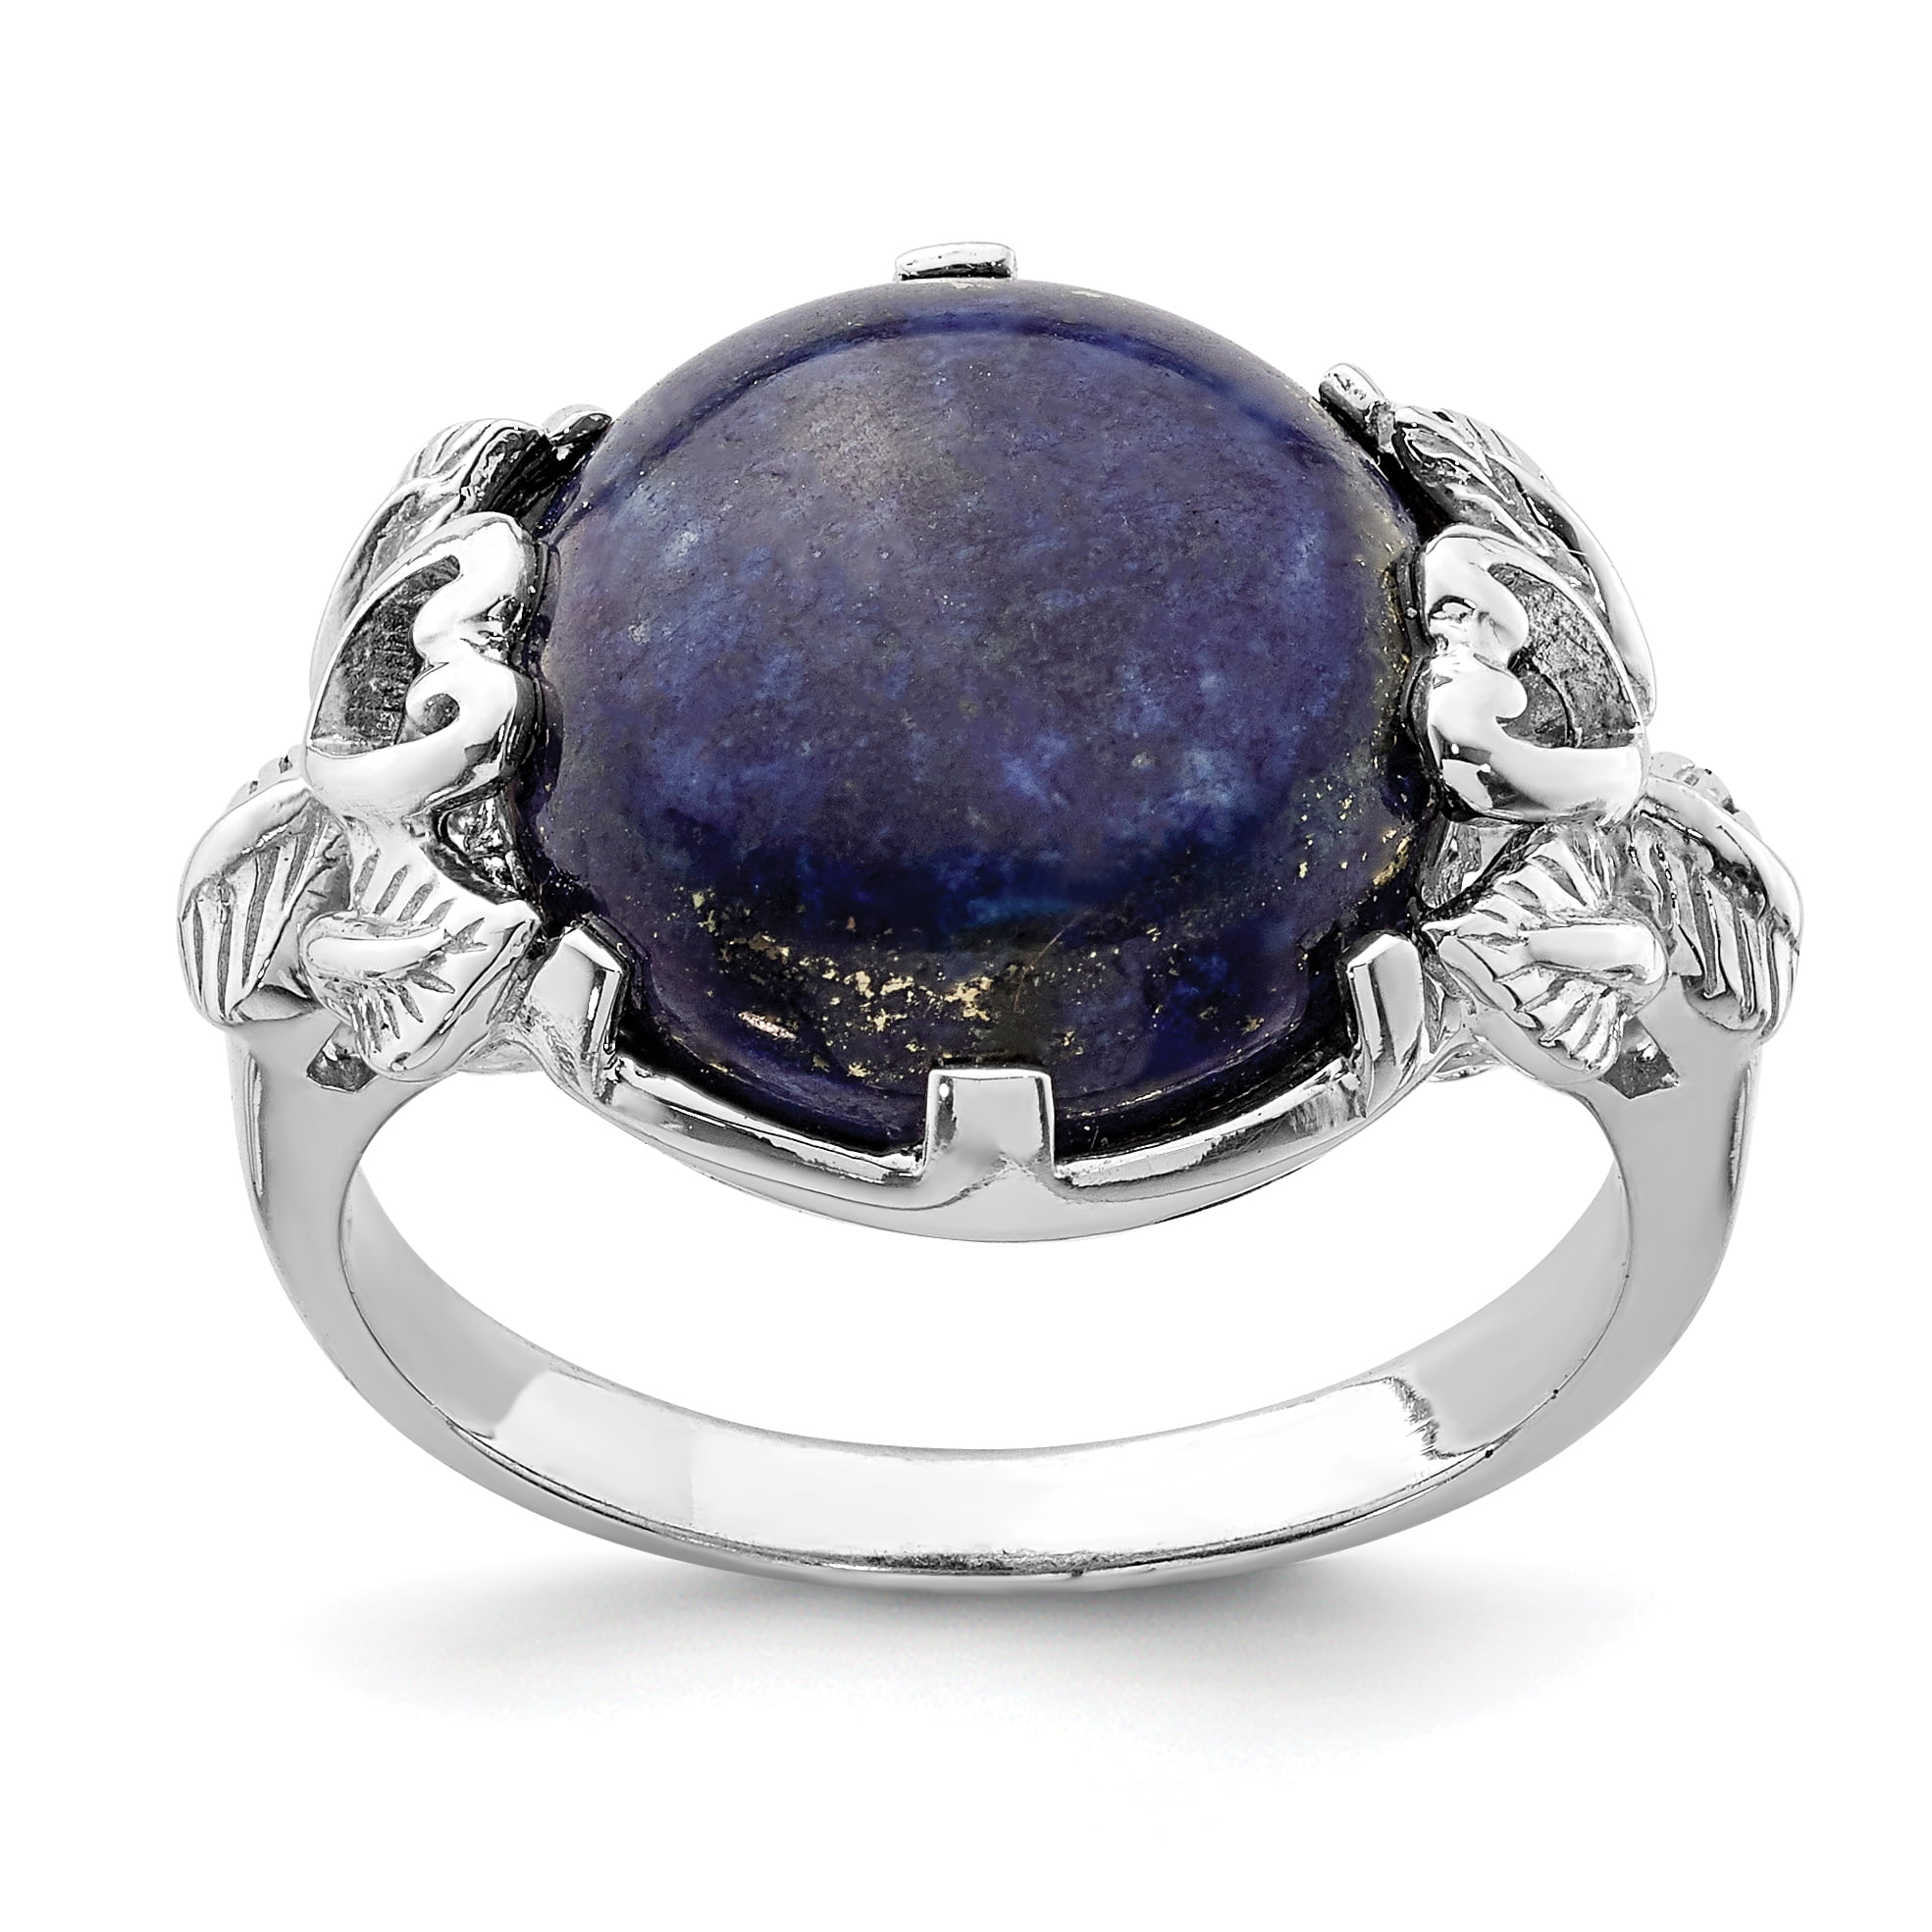 Details about   Pure 925 Sterling Silver Ring Set Natural Oval Lapis Lazuli 喜 Ring W43938